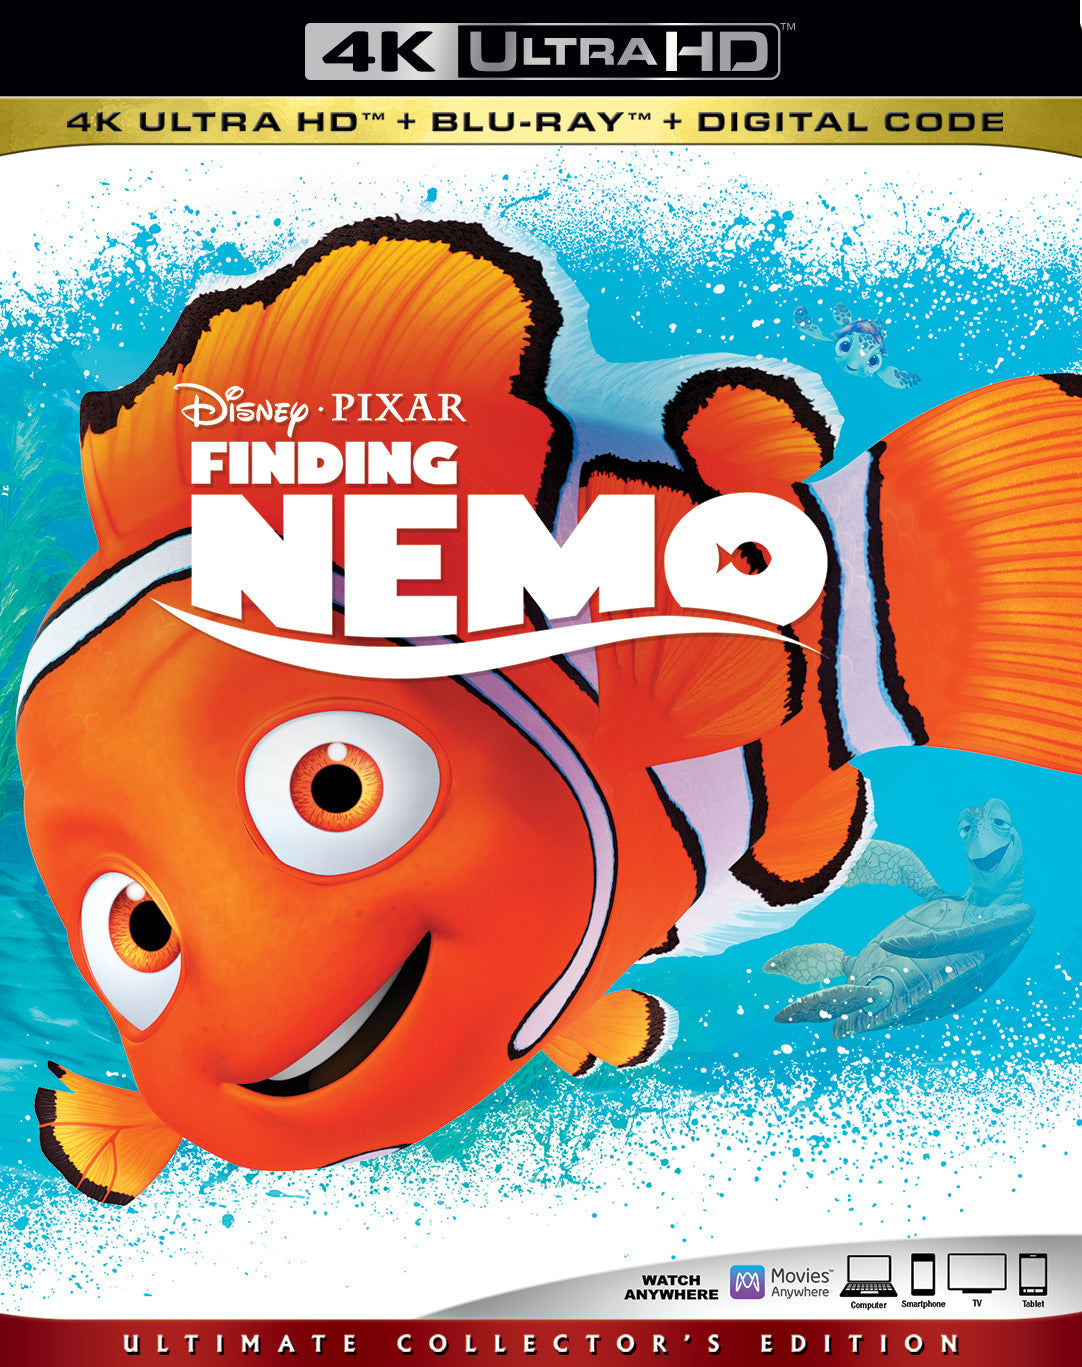 Finding Nemo (2003) Vudu or Movies Anywhere 4K redemption only